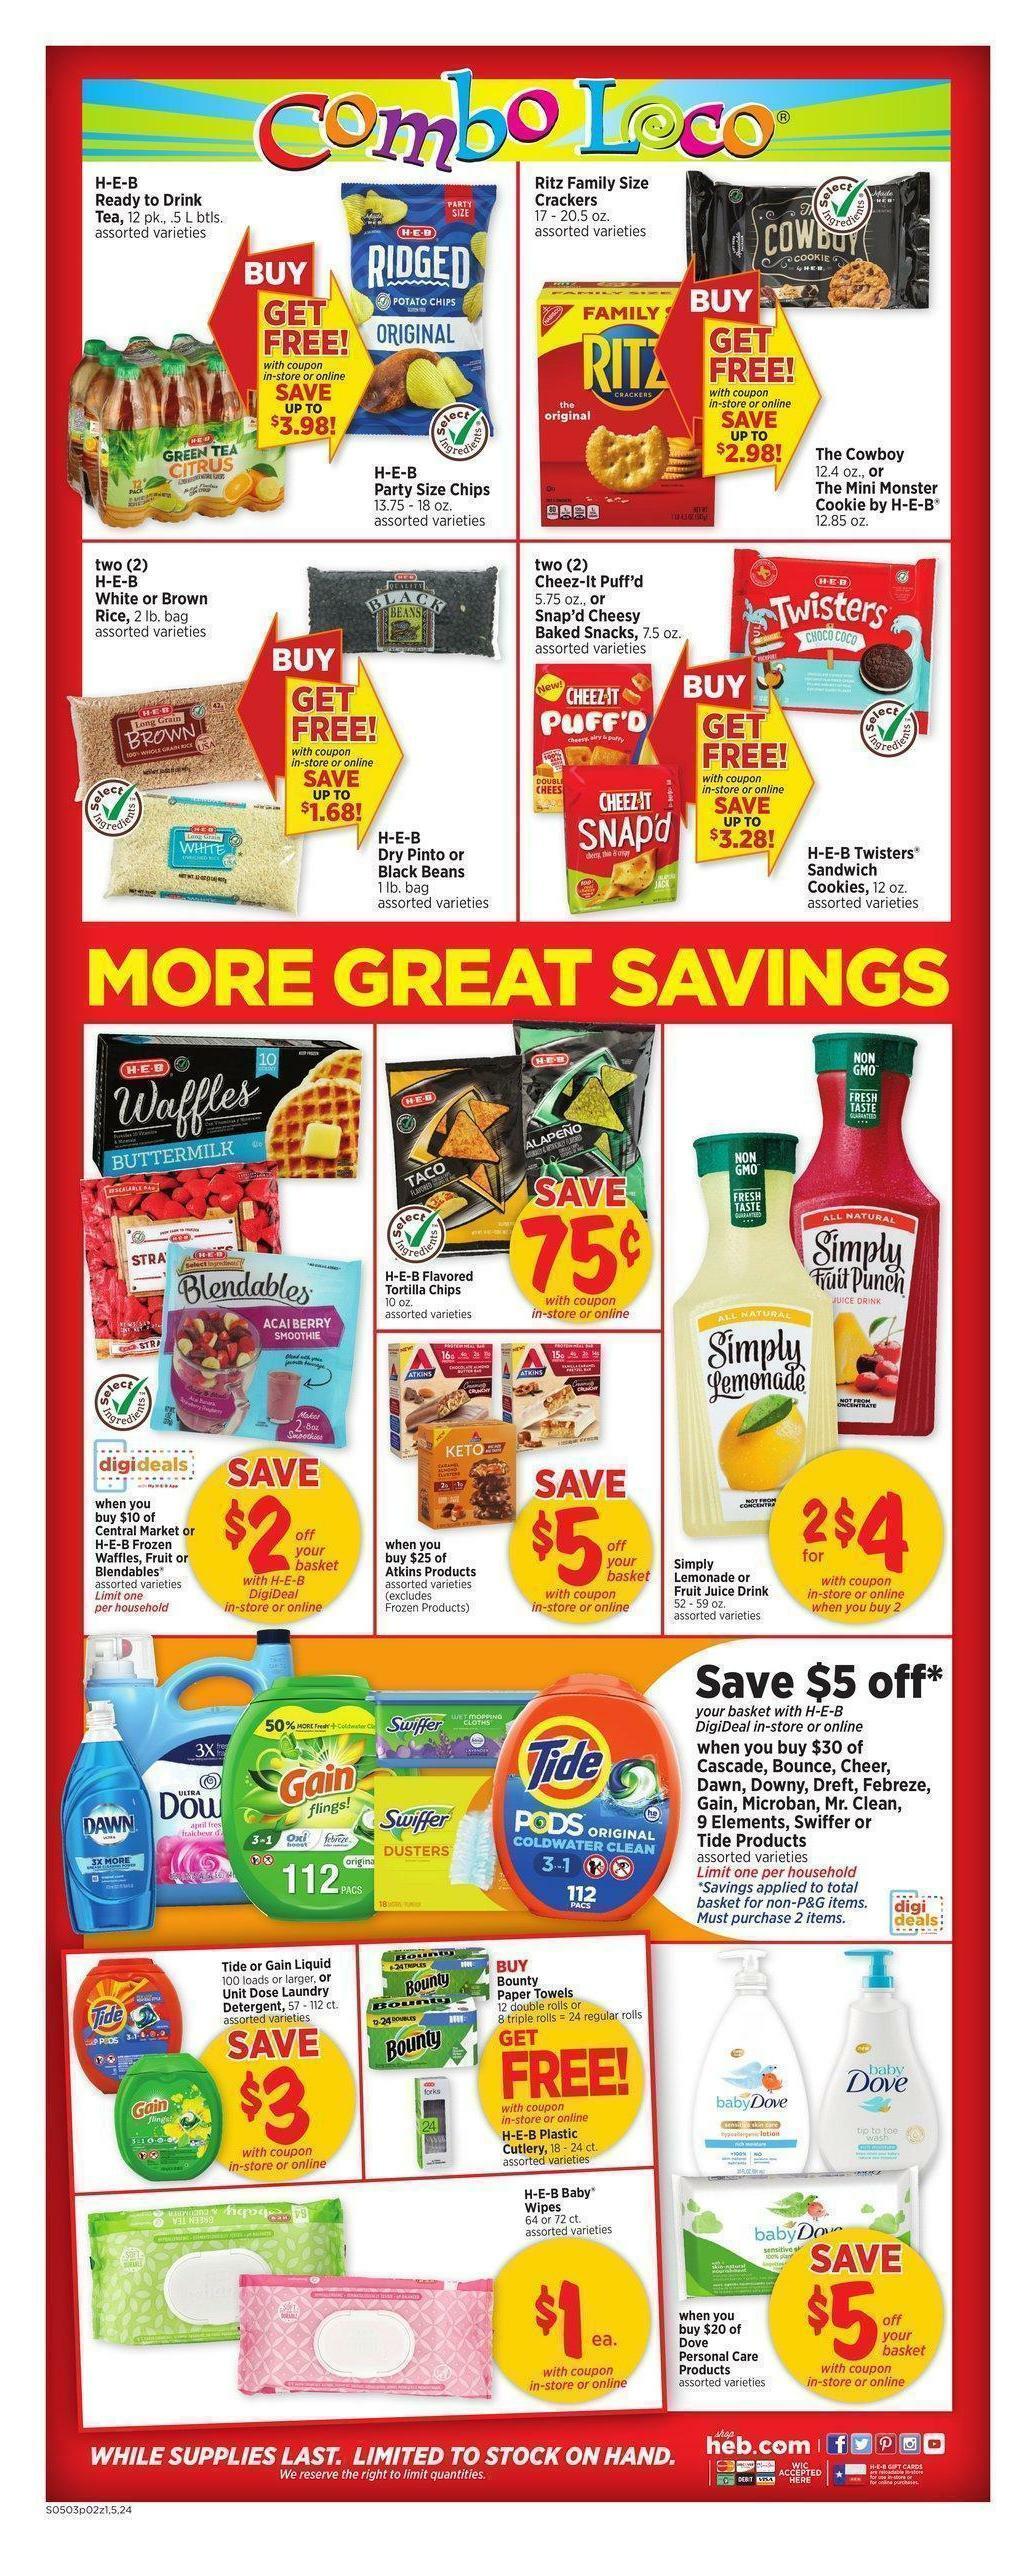 H-E-B Weekly Ad from May 3